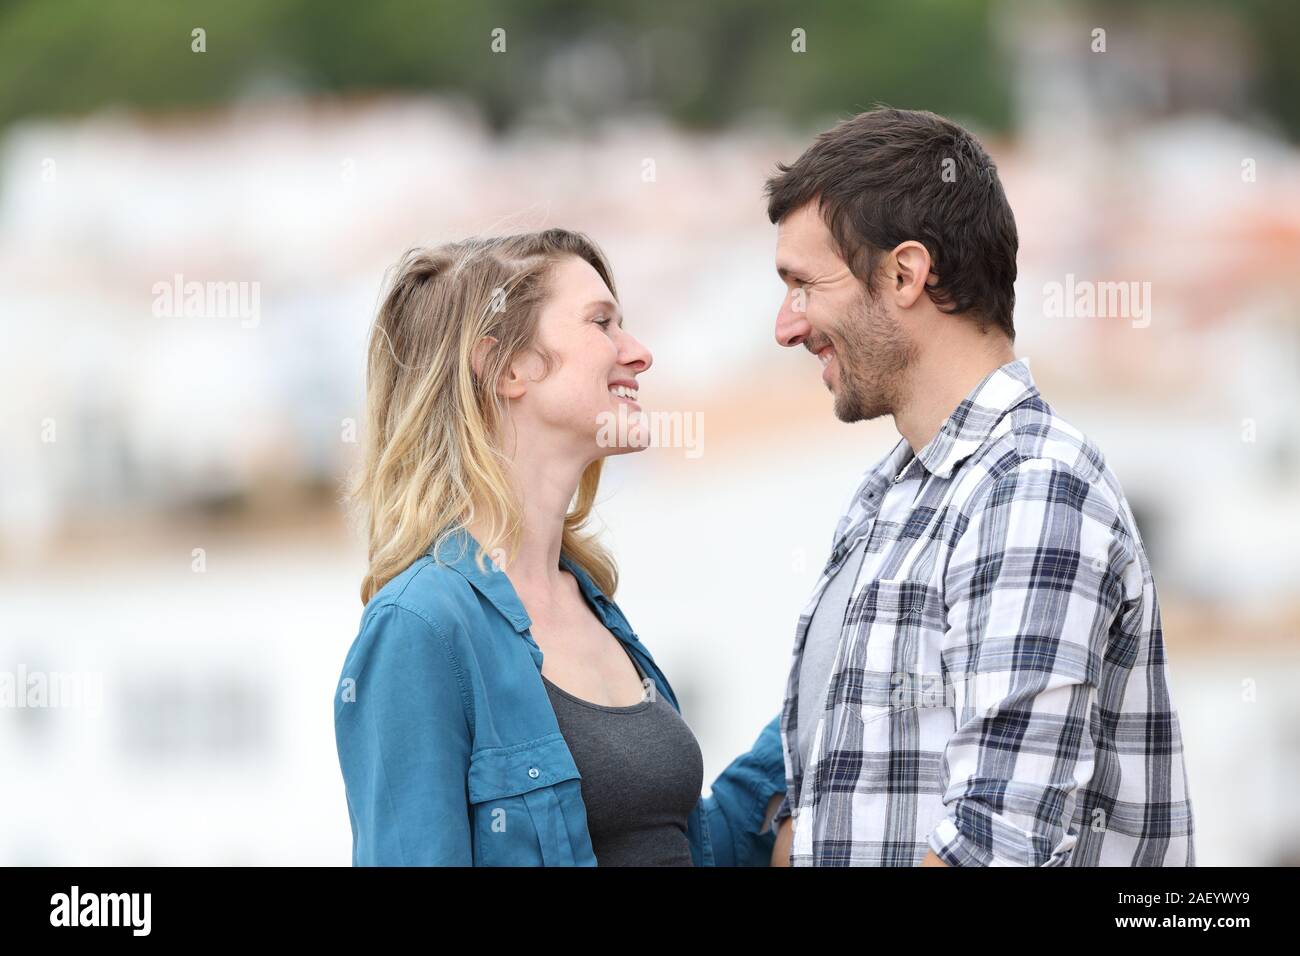 Profile of a couple flirting looking each other standing outdoors in a rural town Stock Photo